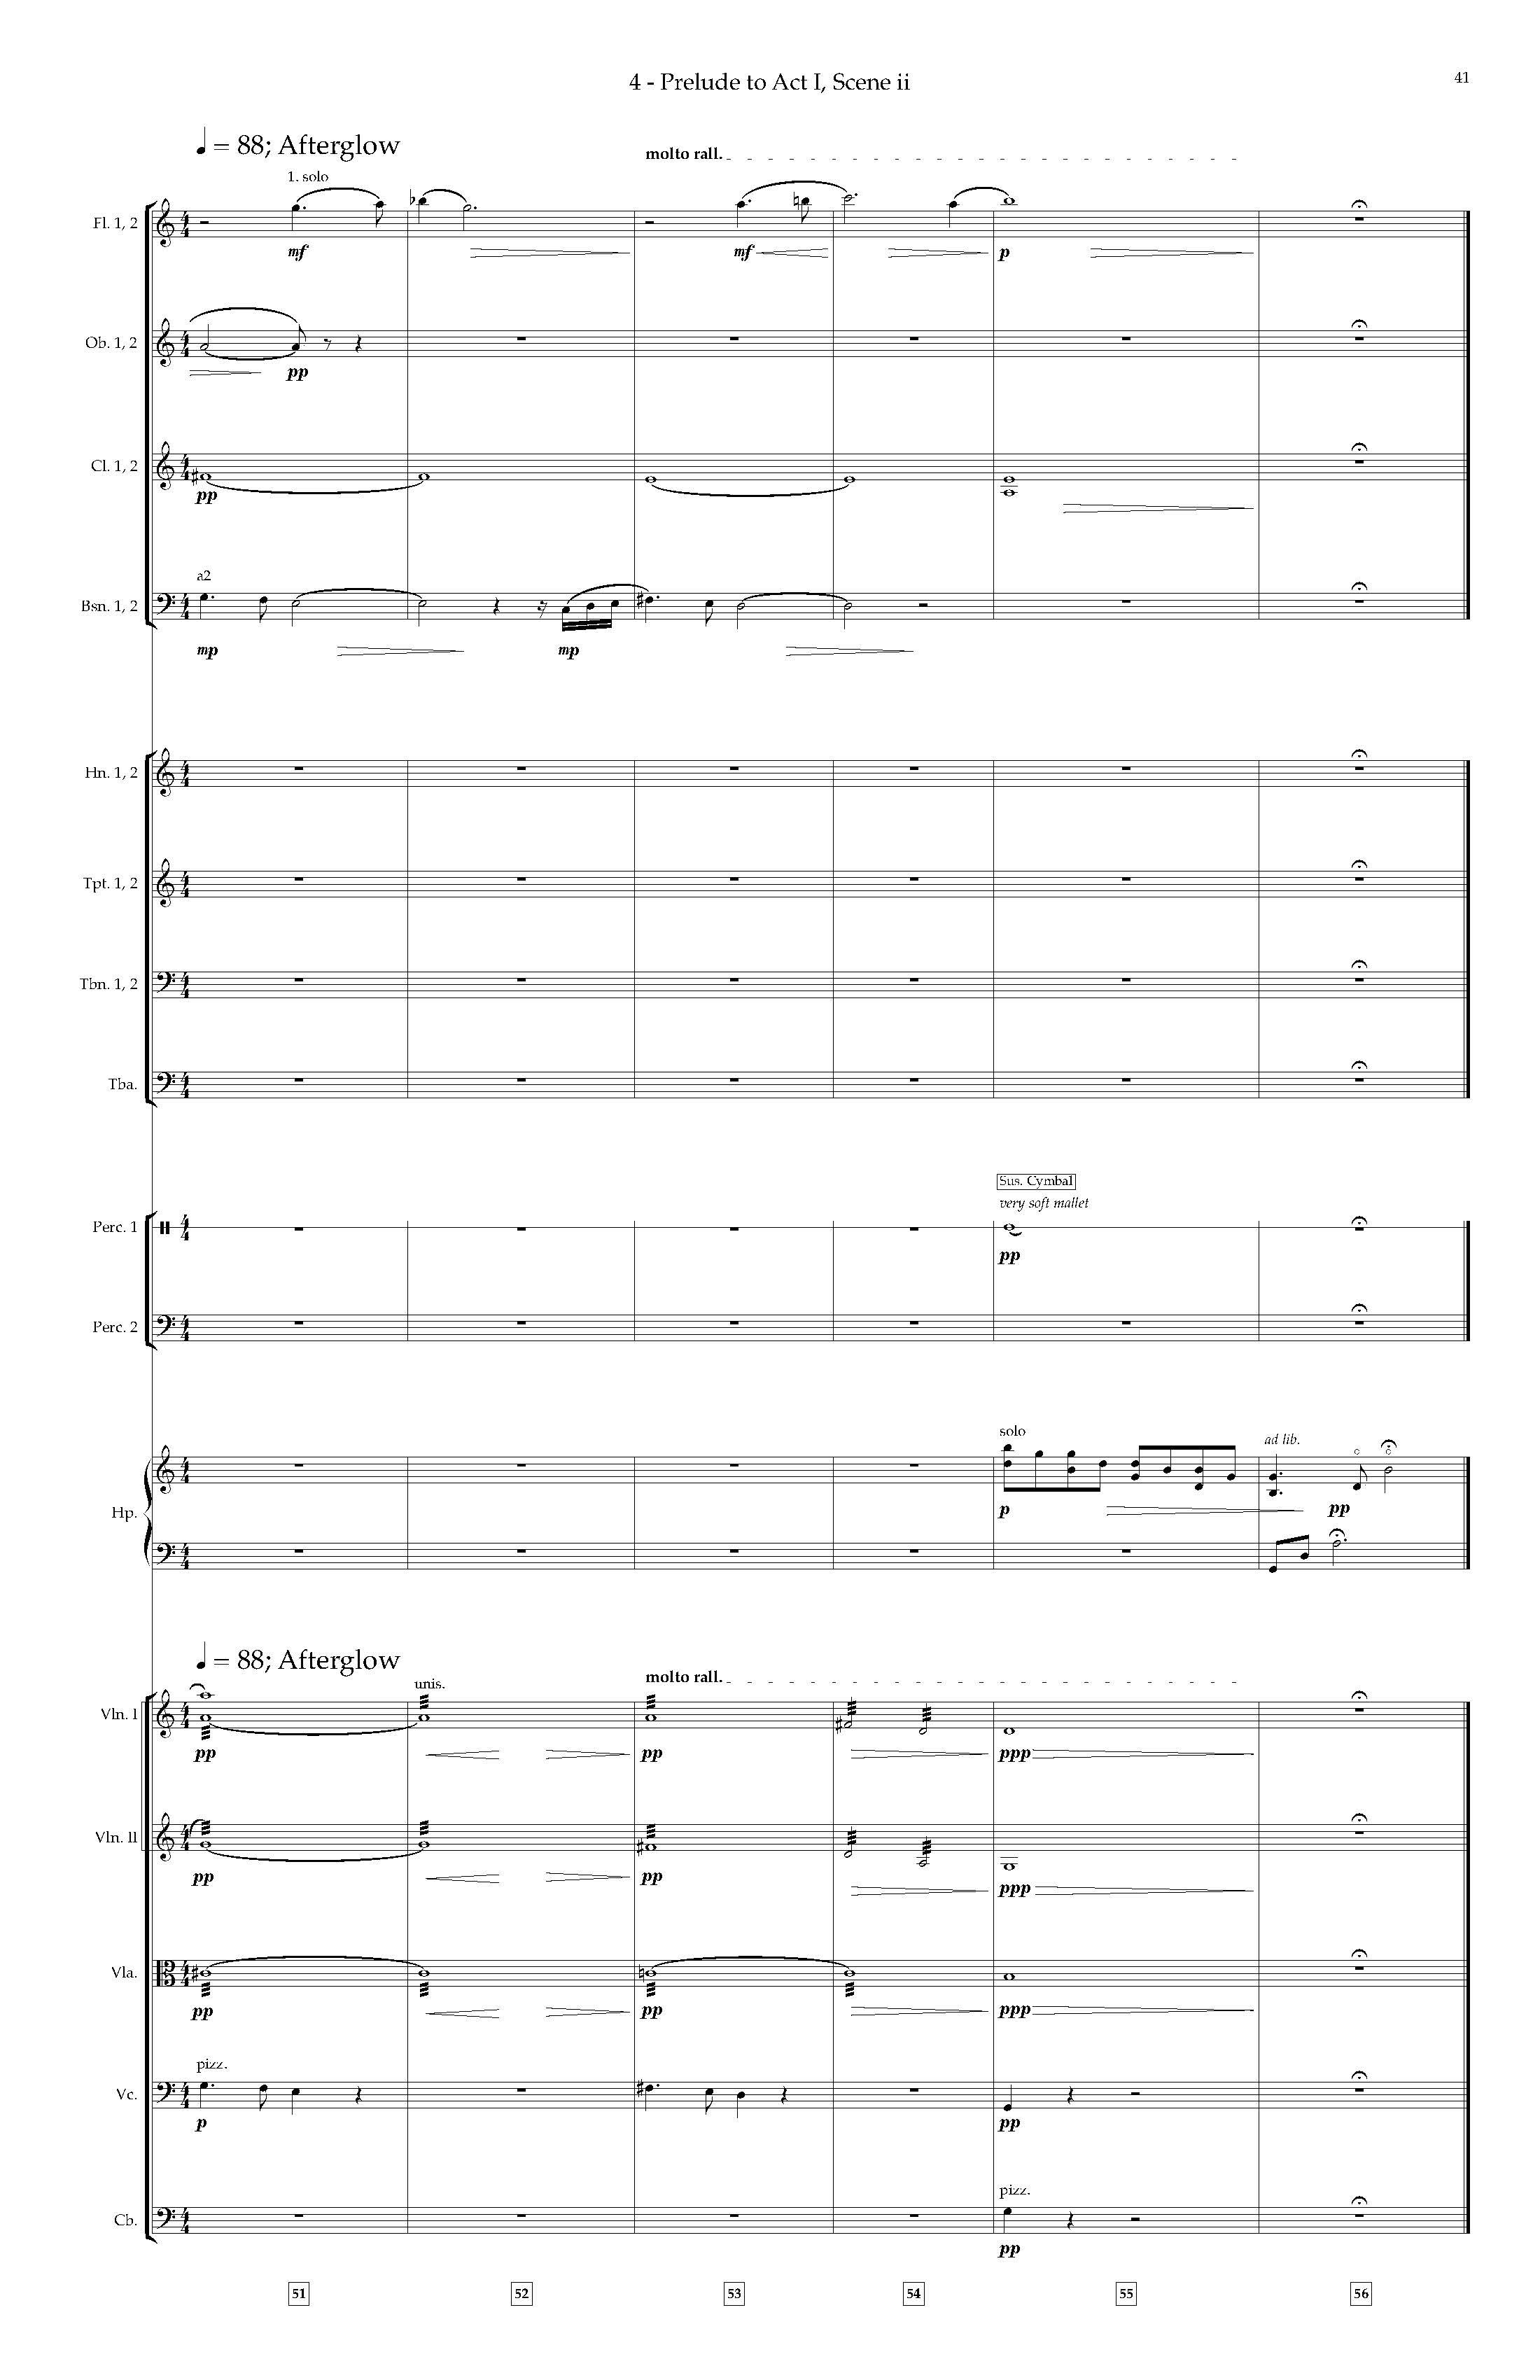 Arias and Interludes from HWGS - Complete Score_Page_47.jpg